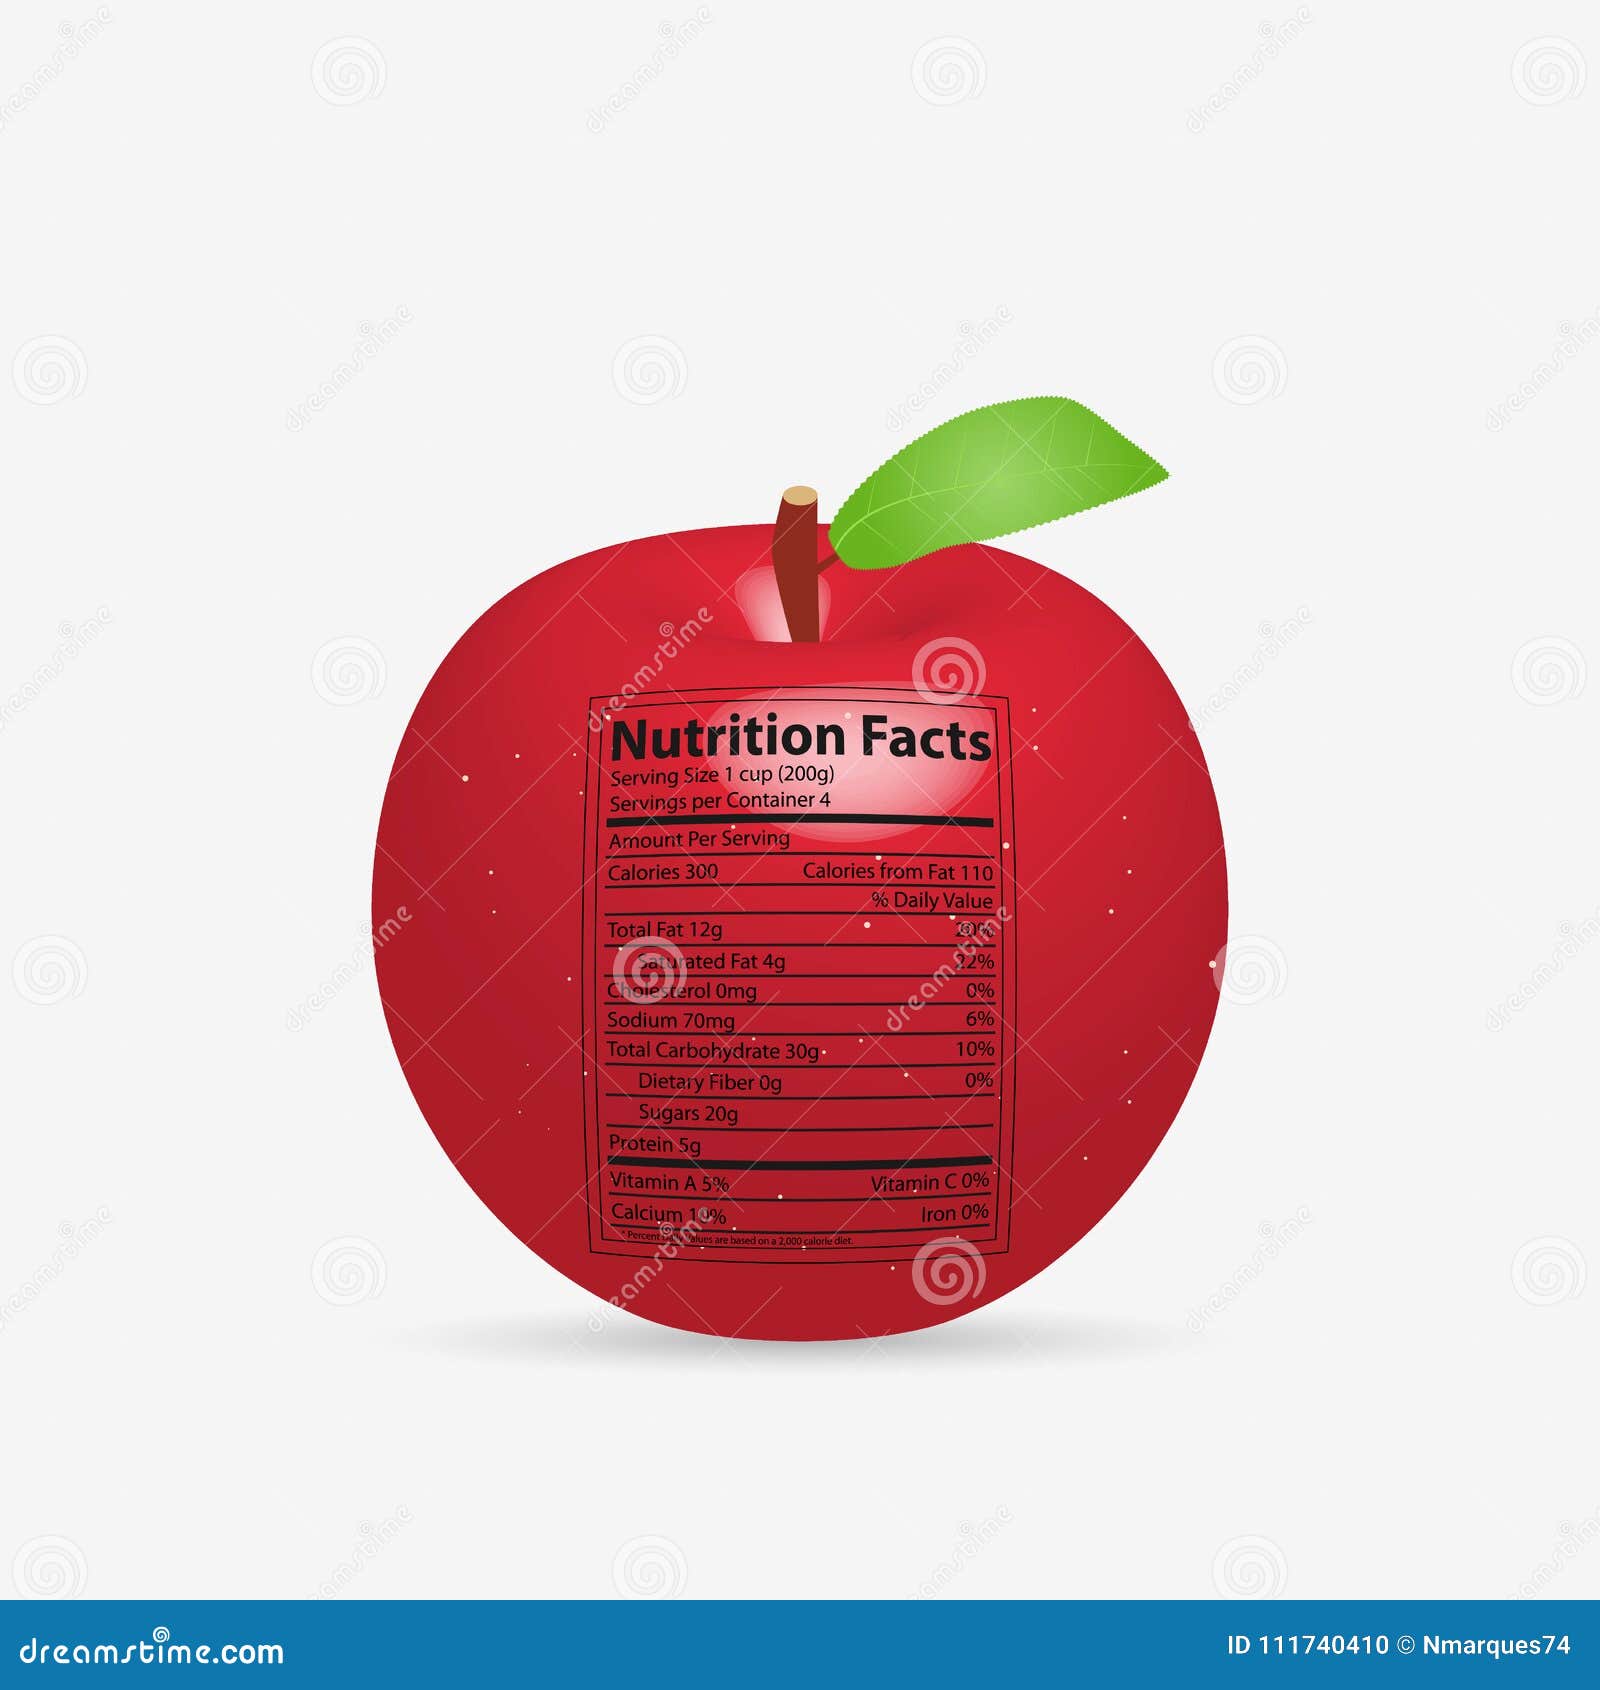 Calories in Red Delicious Apples and Nutrition Facts